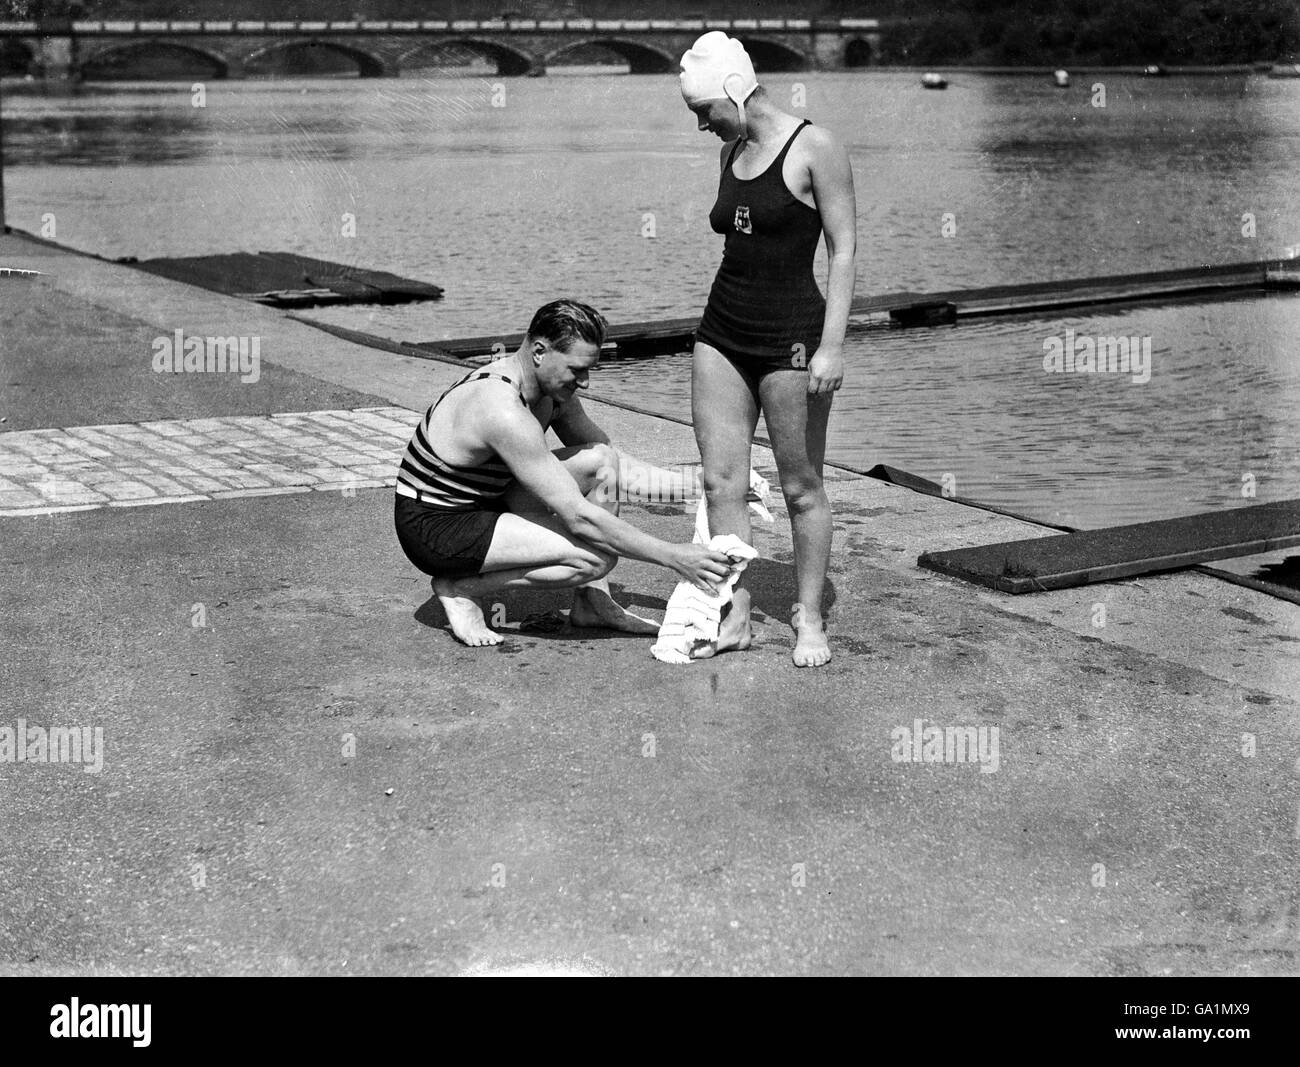 Miss Eva Coleman, who intends to attempt the Channel swim this summer, is using the Hyde Park Lido as a training ground. Her trainer, Burgess, considers she has a good chance of breaking the record set up by Gertrude Ederle. Picture shows Miss Eva Coleman receiving a towelling down from her trainer, Burgess, after her swim Stock Photo